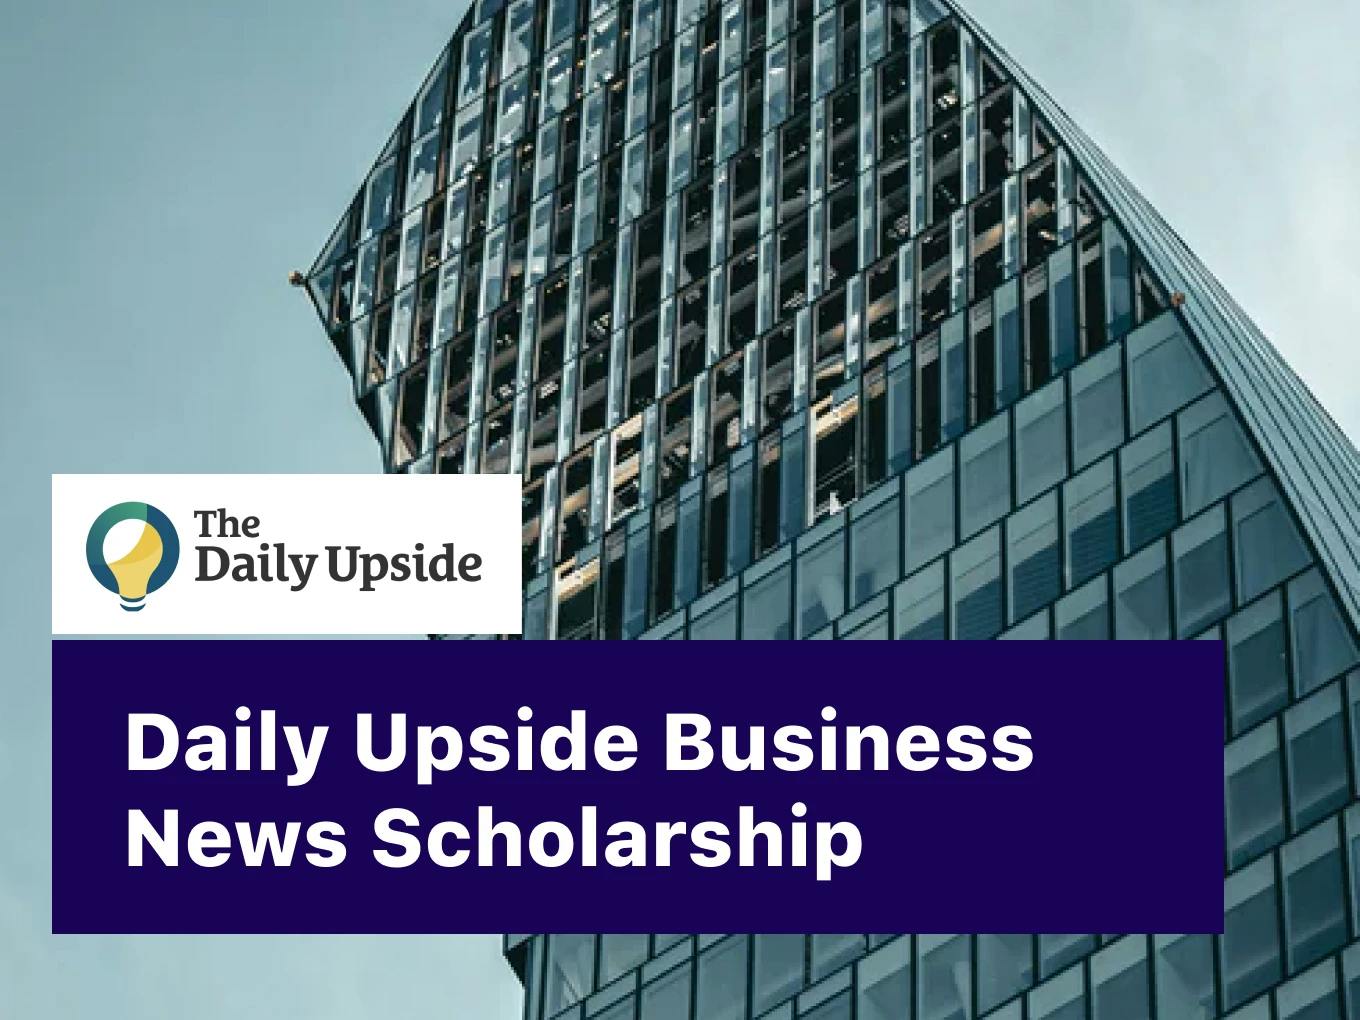 Daily Upside Business News Scholarship